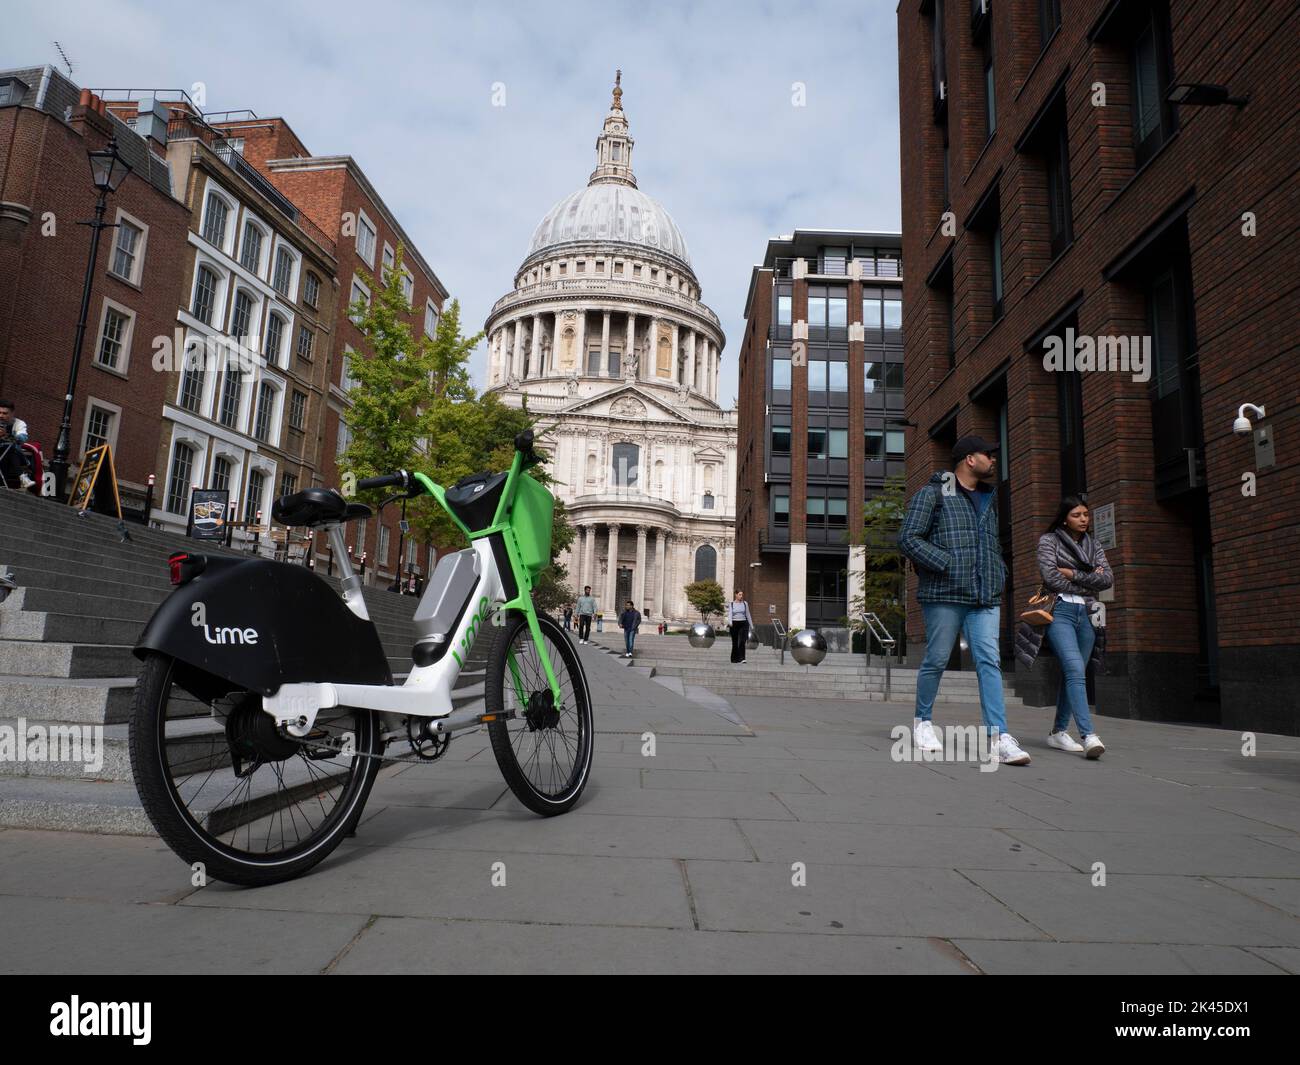 Lime Electric Verleih-E-Bike in der Nähe der St Pauls Cathedral, City of London, Stockfoto